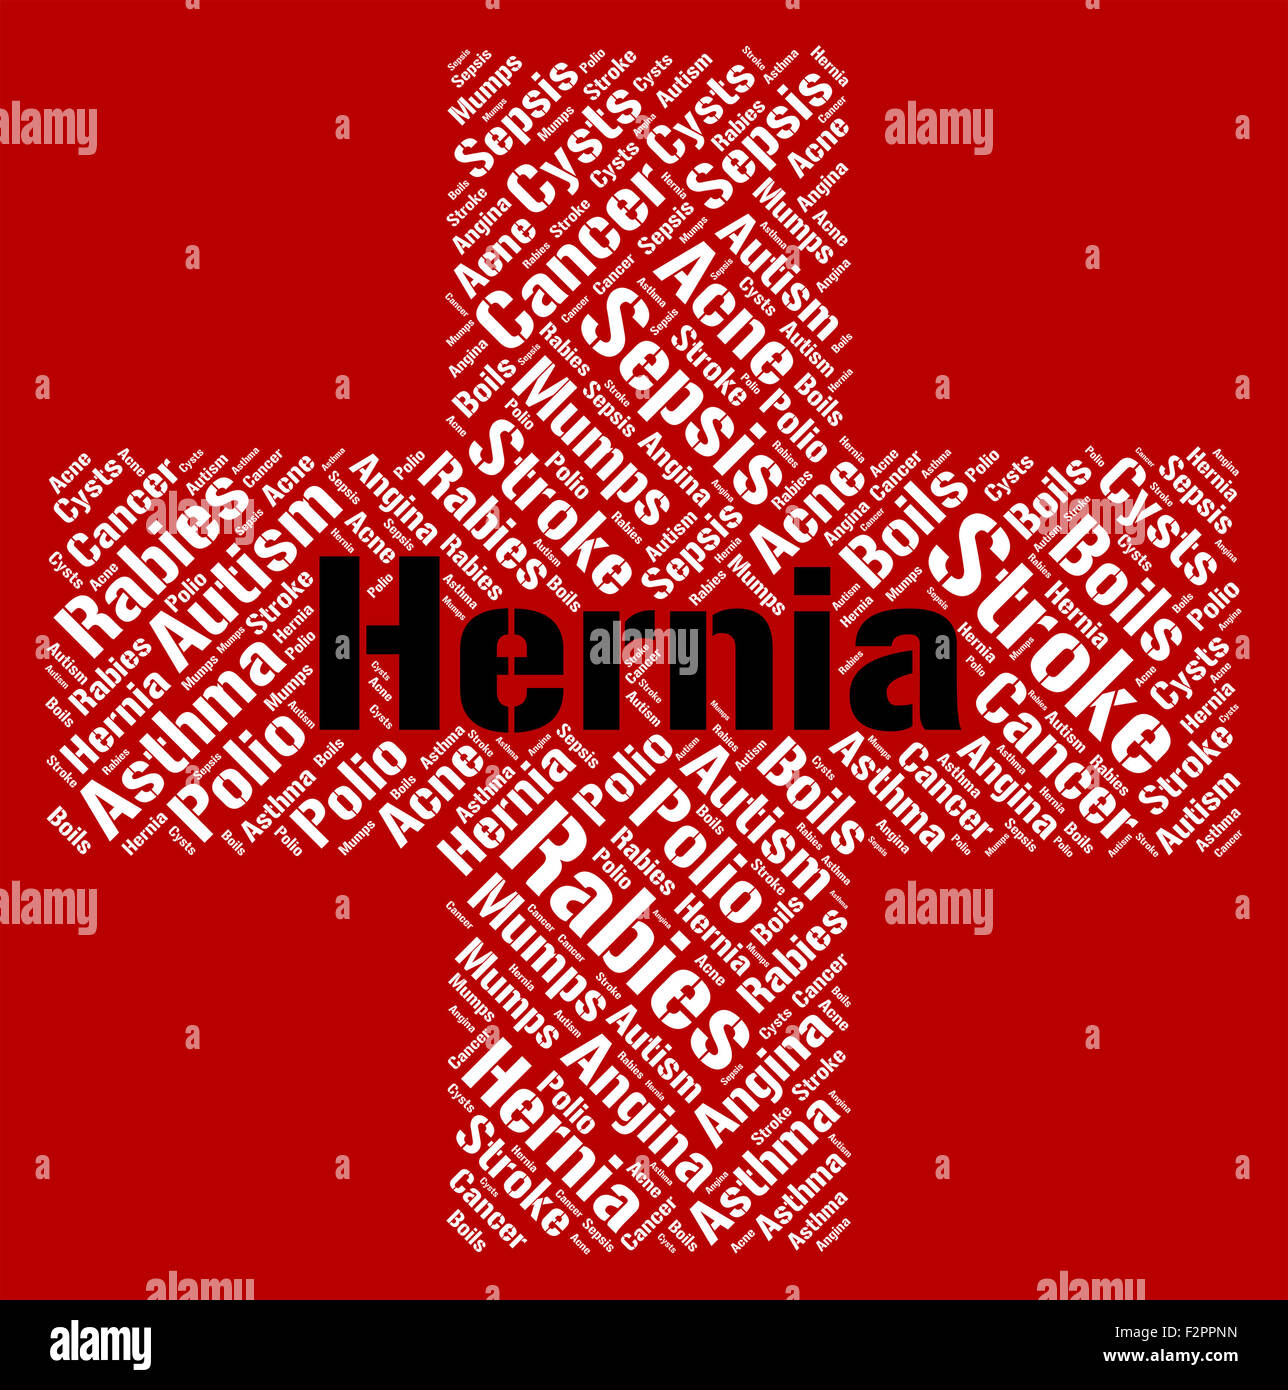 Hernia Word Meaning Ill Health And Afflictions Stock Photo